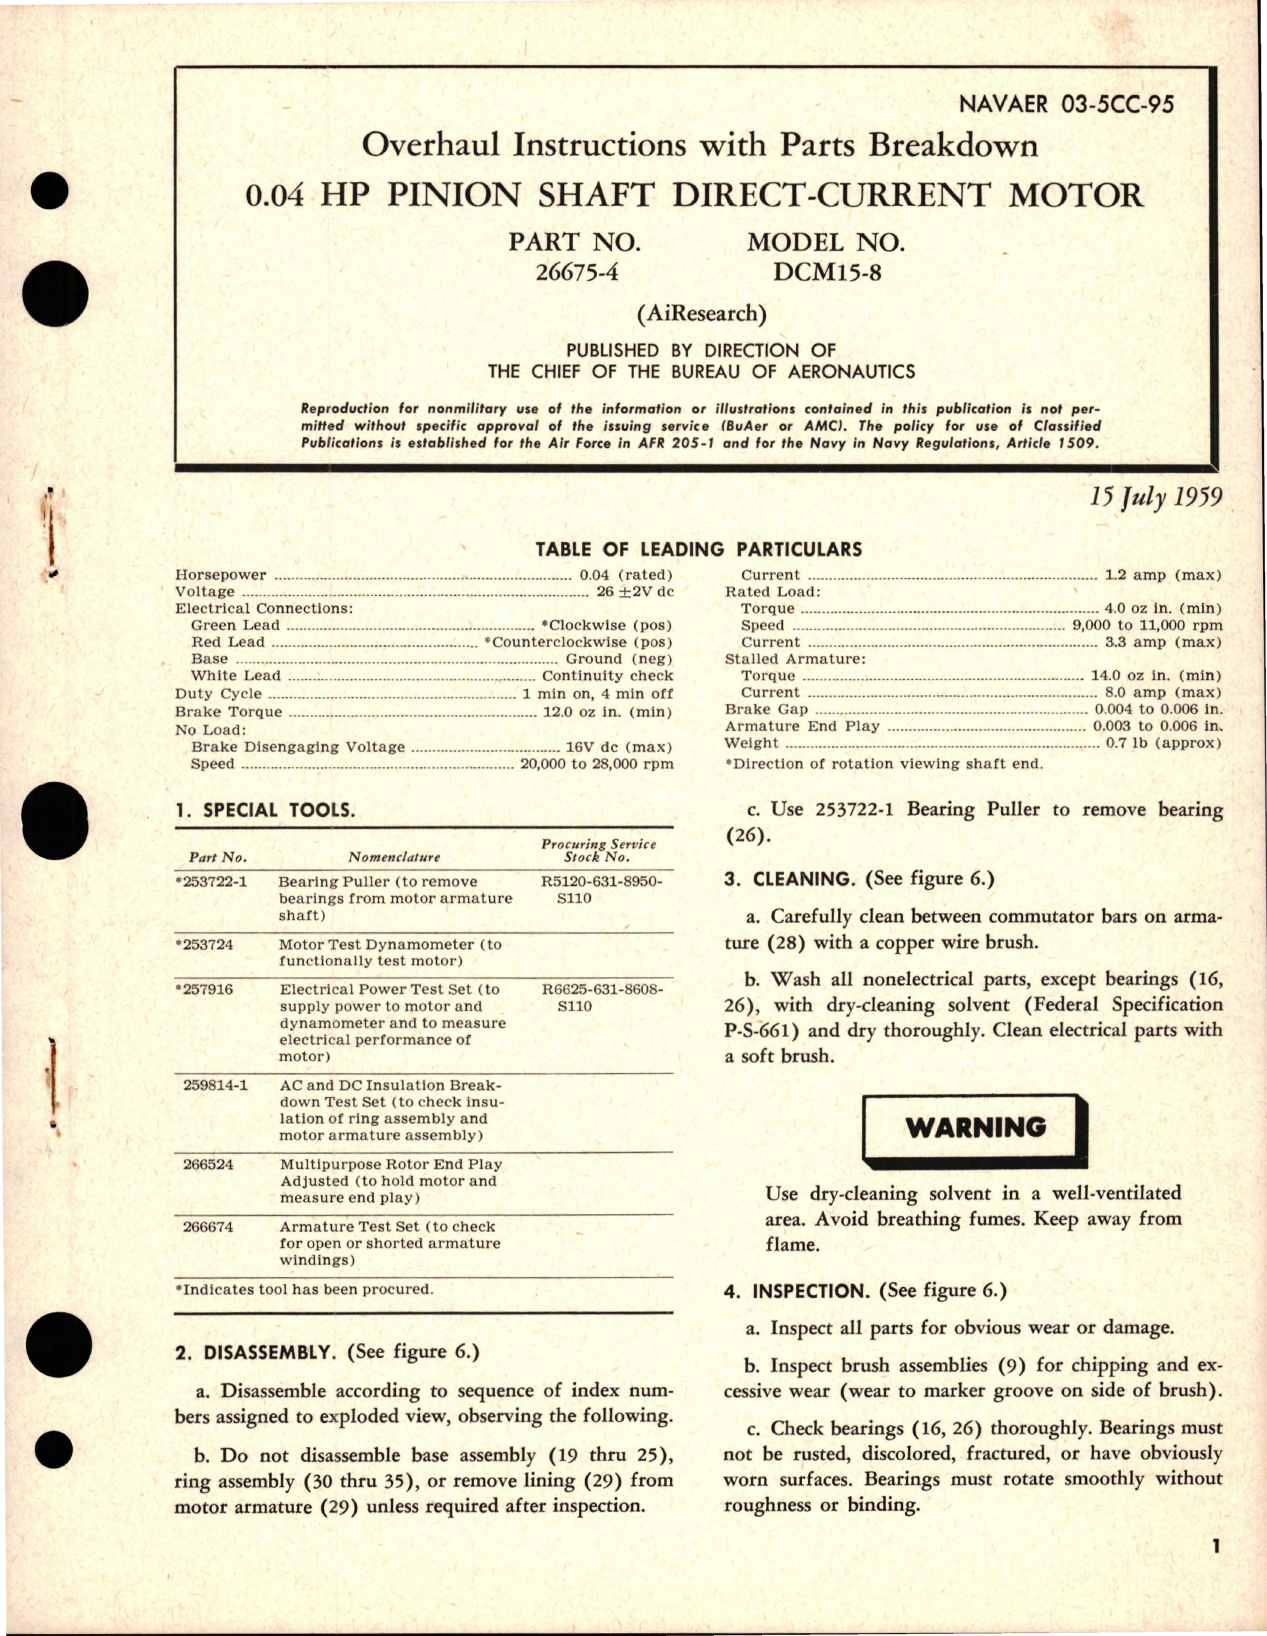 Sample page 1 from AirCorps Library document: Overhaul Instructions with Parts Breakdown for Pinion Shaft Direct-Current Motor 0.04 HP - Part 26675-4 - Model DCM15-8